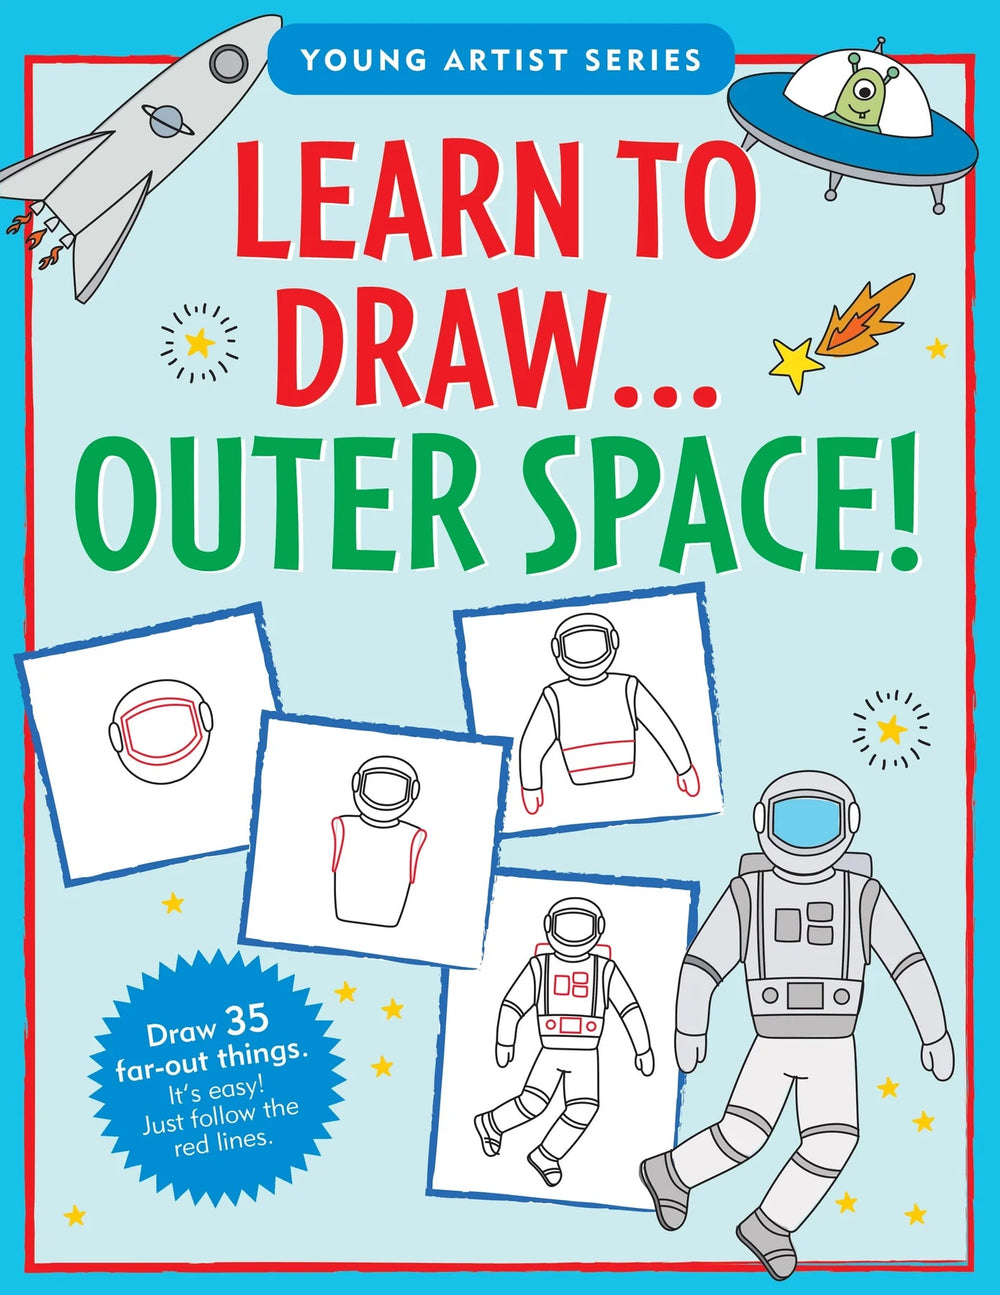 Learn to Draw Outer Space! - Anilas UK